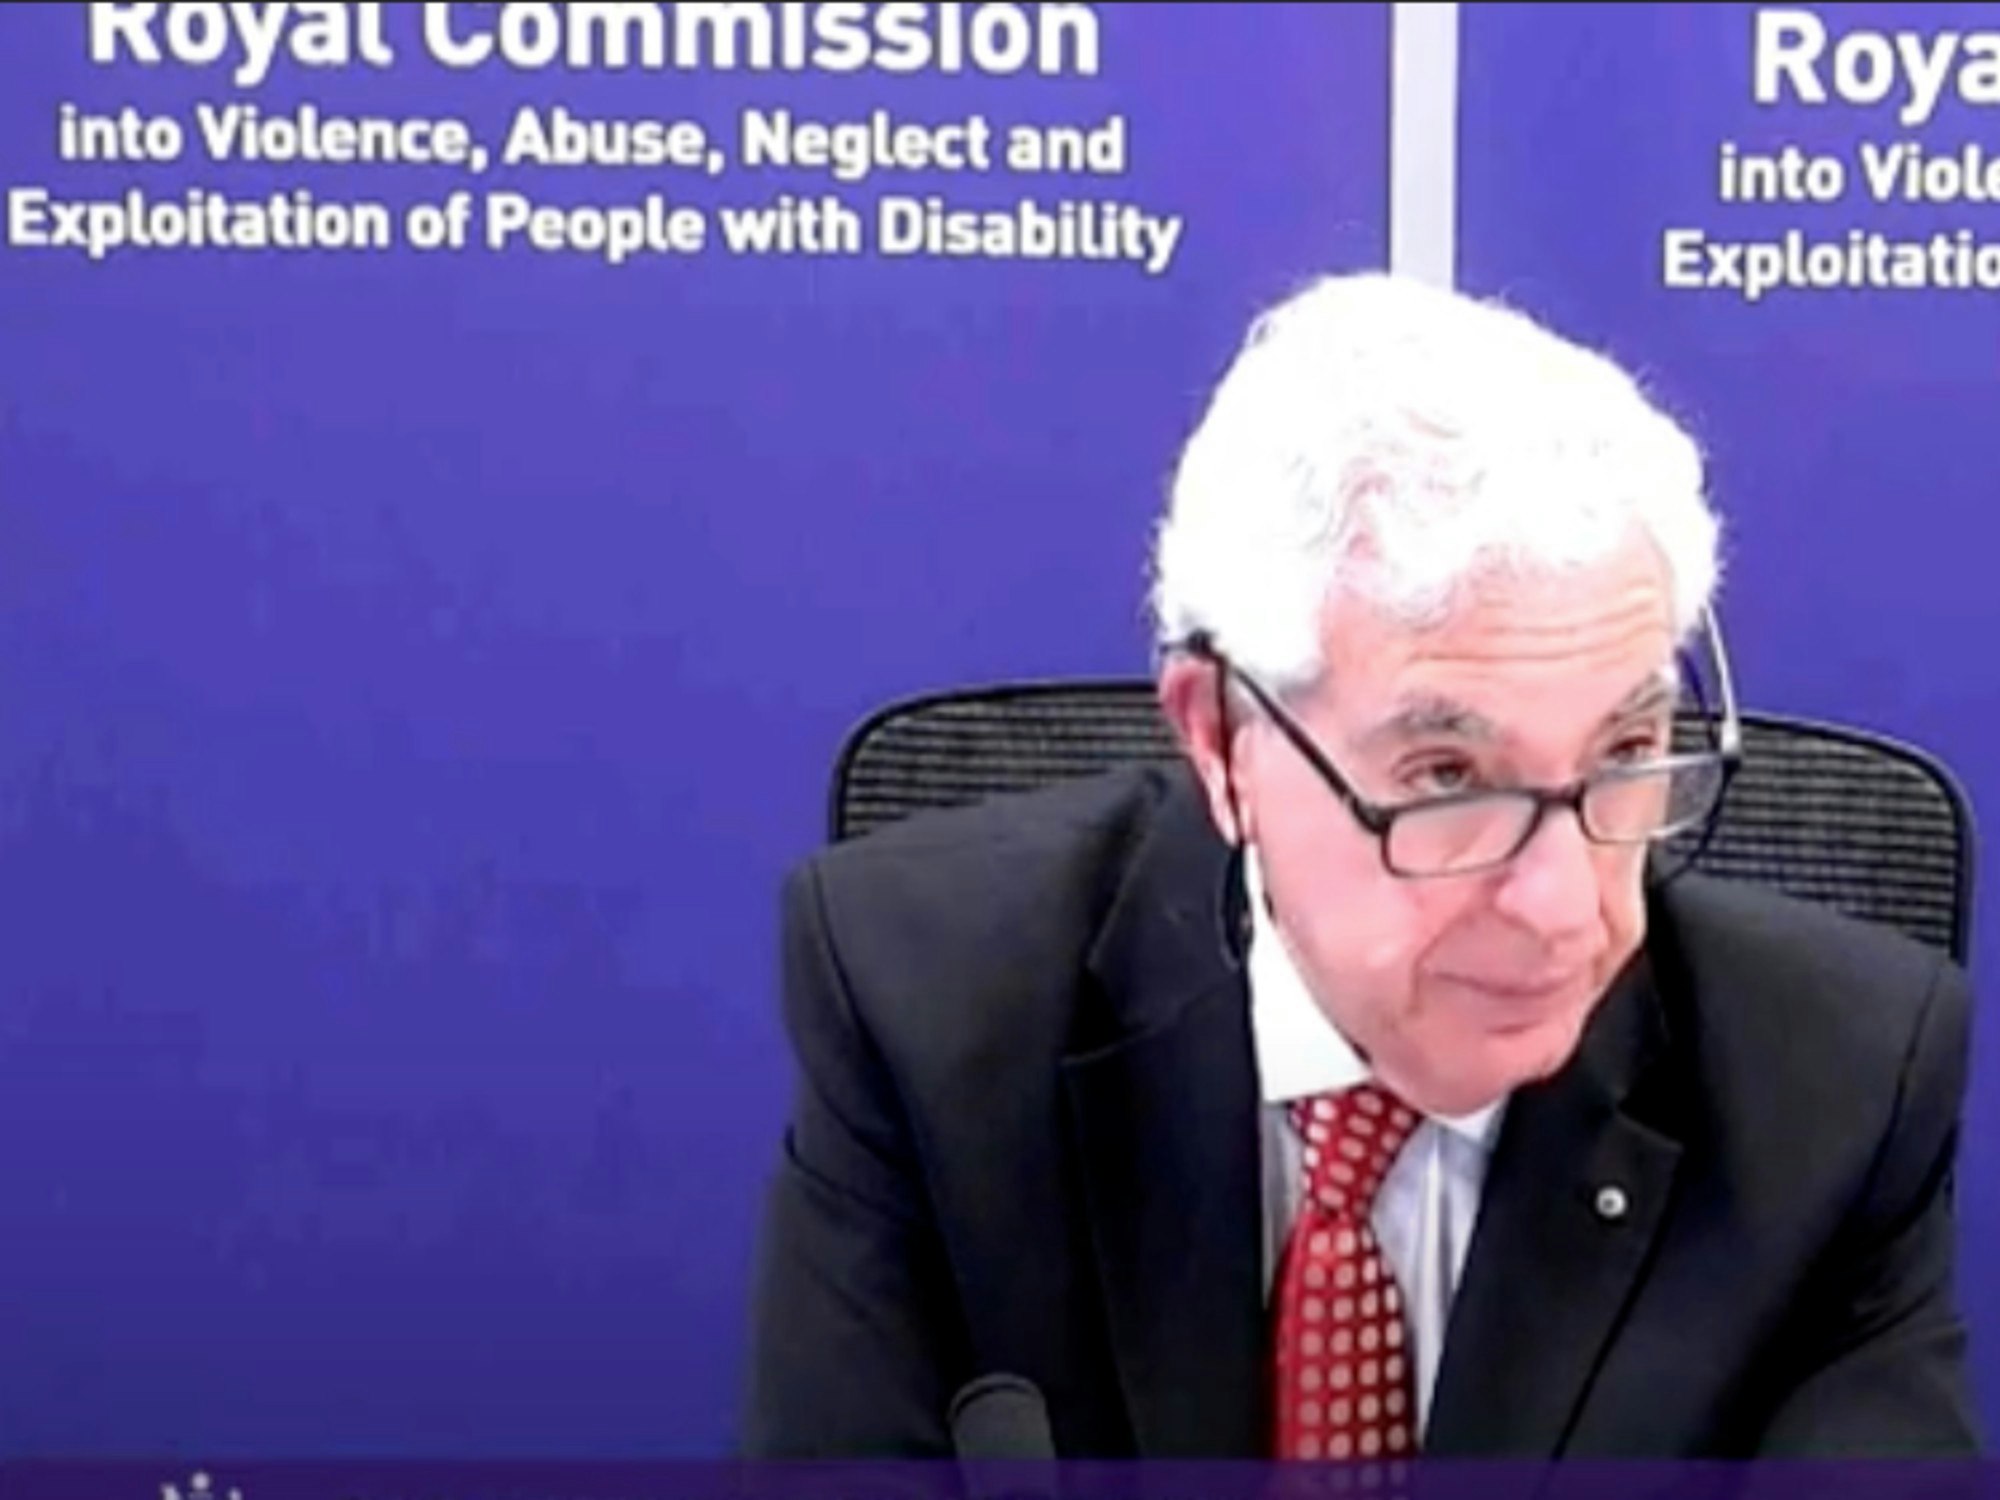 Chair of the Disability Royal Commission the Honourable Ronald Sackville AO QC says changes to confidentiality to protect people with disability are timely. [Source: Disability Royal Commission]
